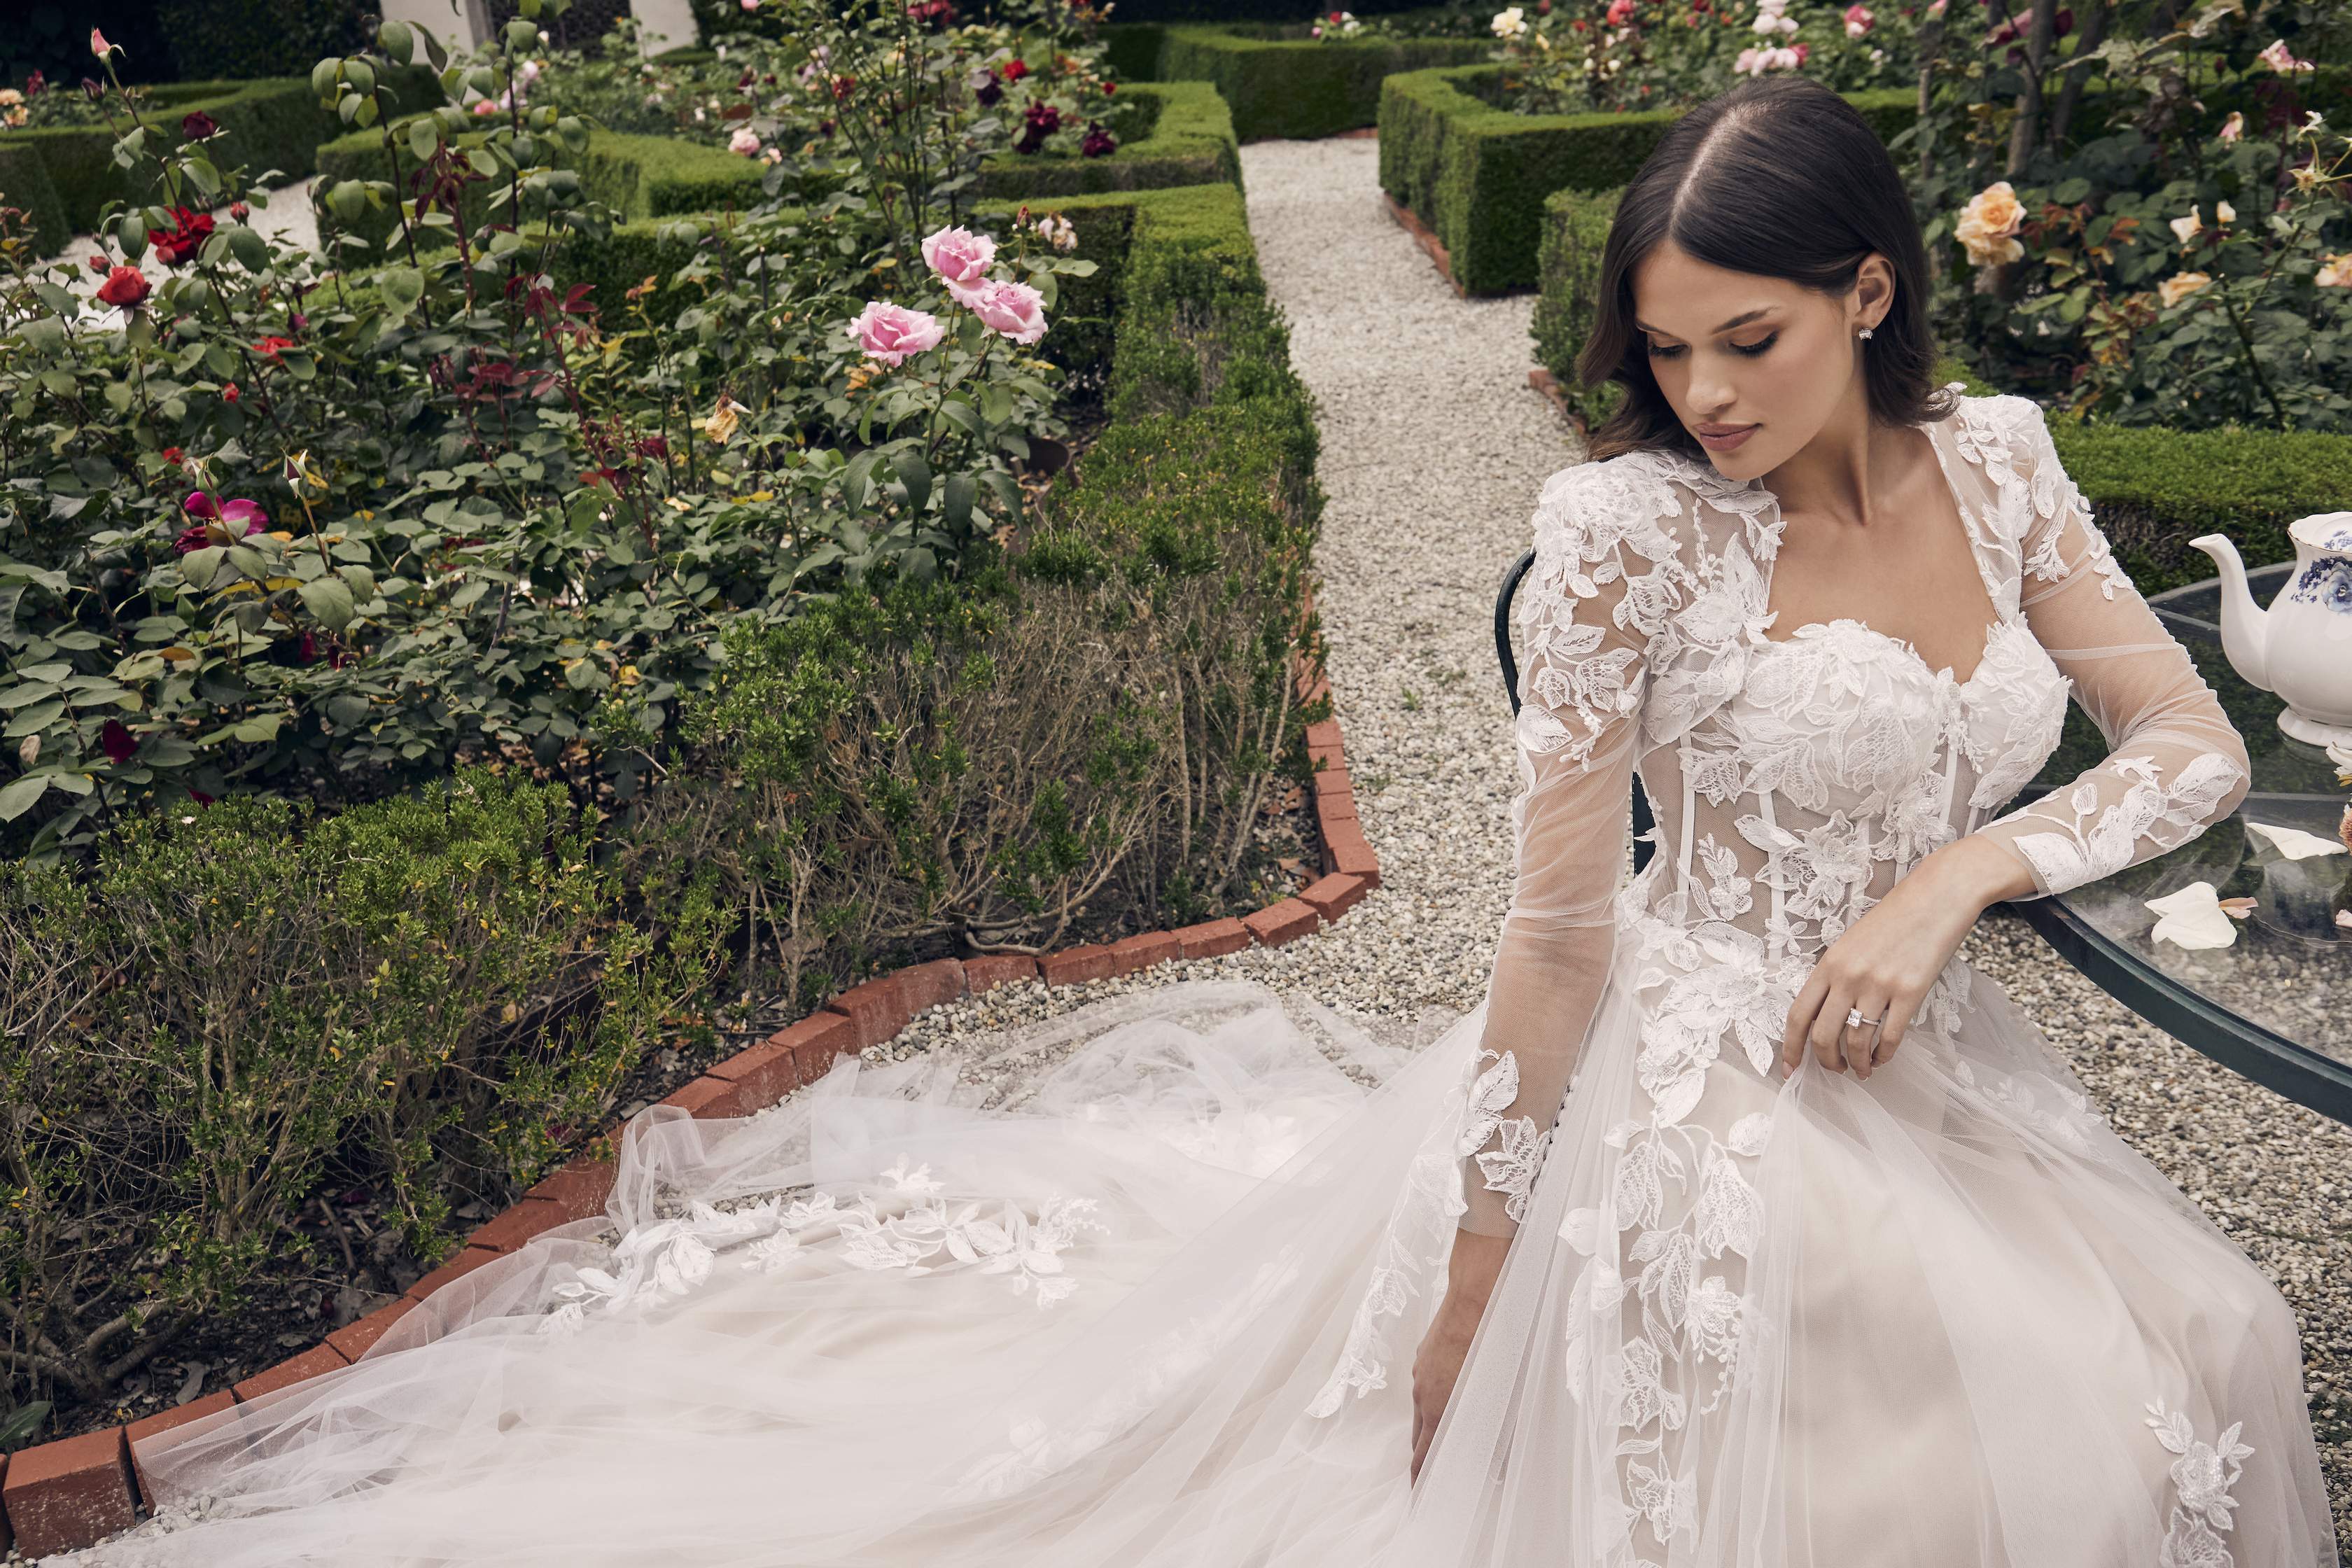 7 Floral Wedding Dresses You Will Love For Your Summer Nuptials